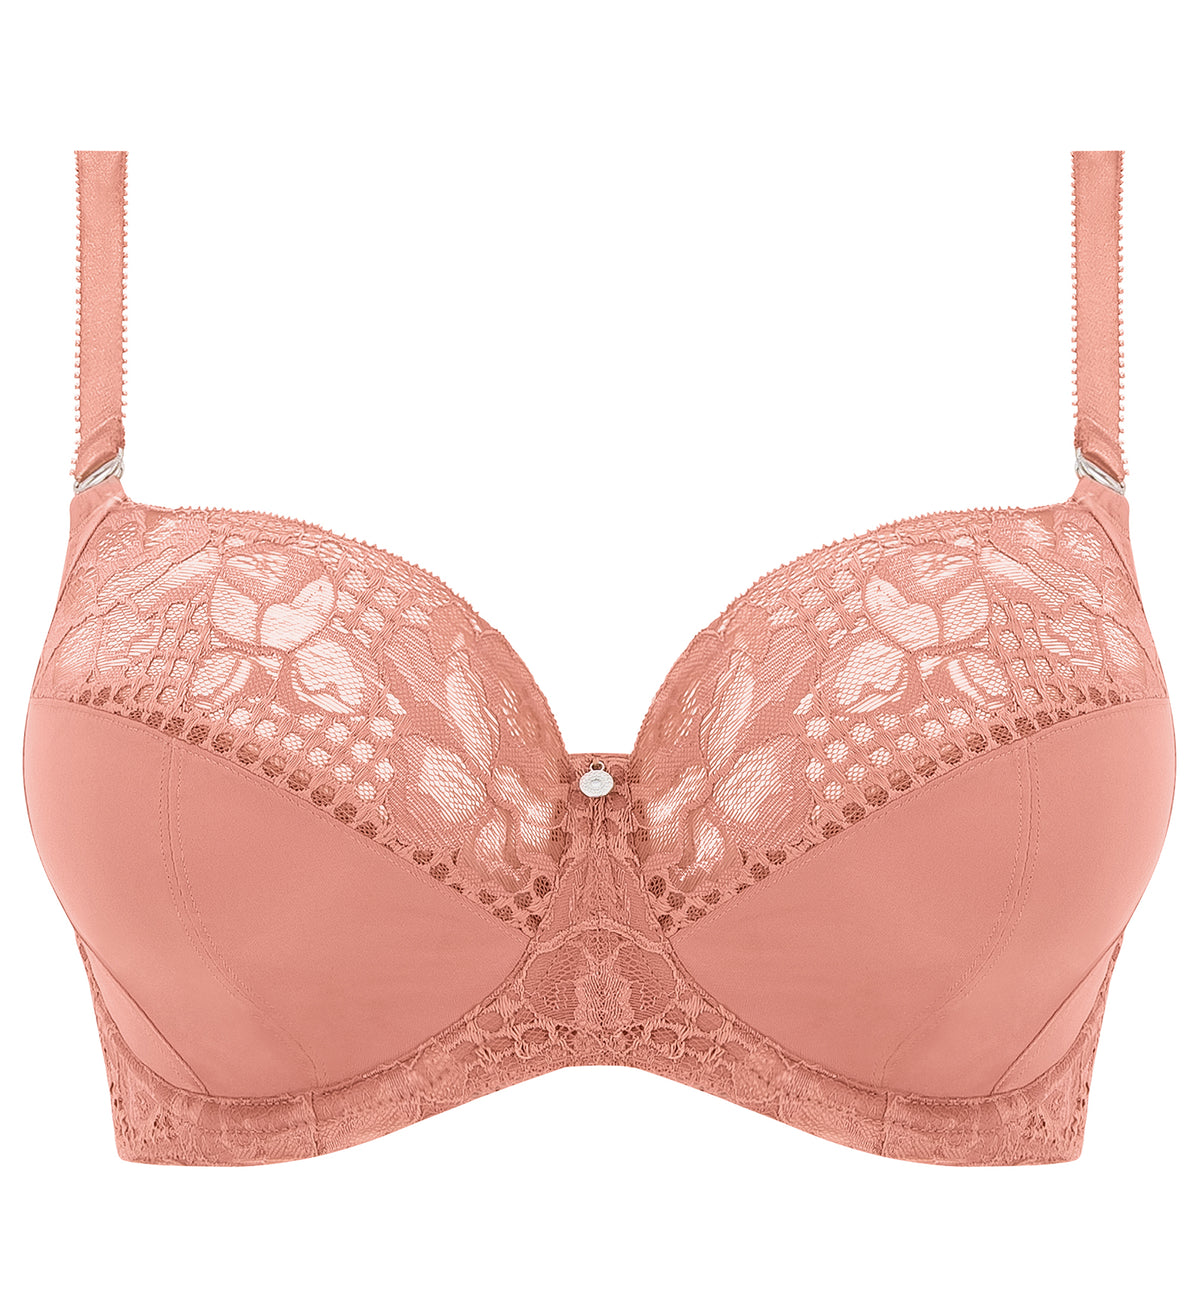 Fantasie Reflect Side Support Stretch Lace Underwire Bra (101801),30F,Sunset - Sunset,30F